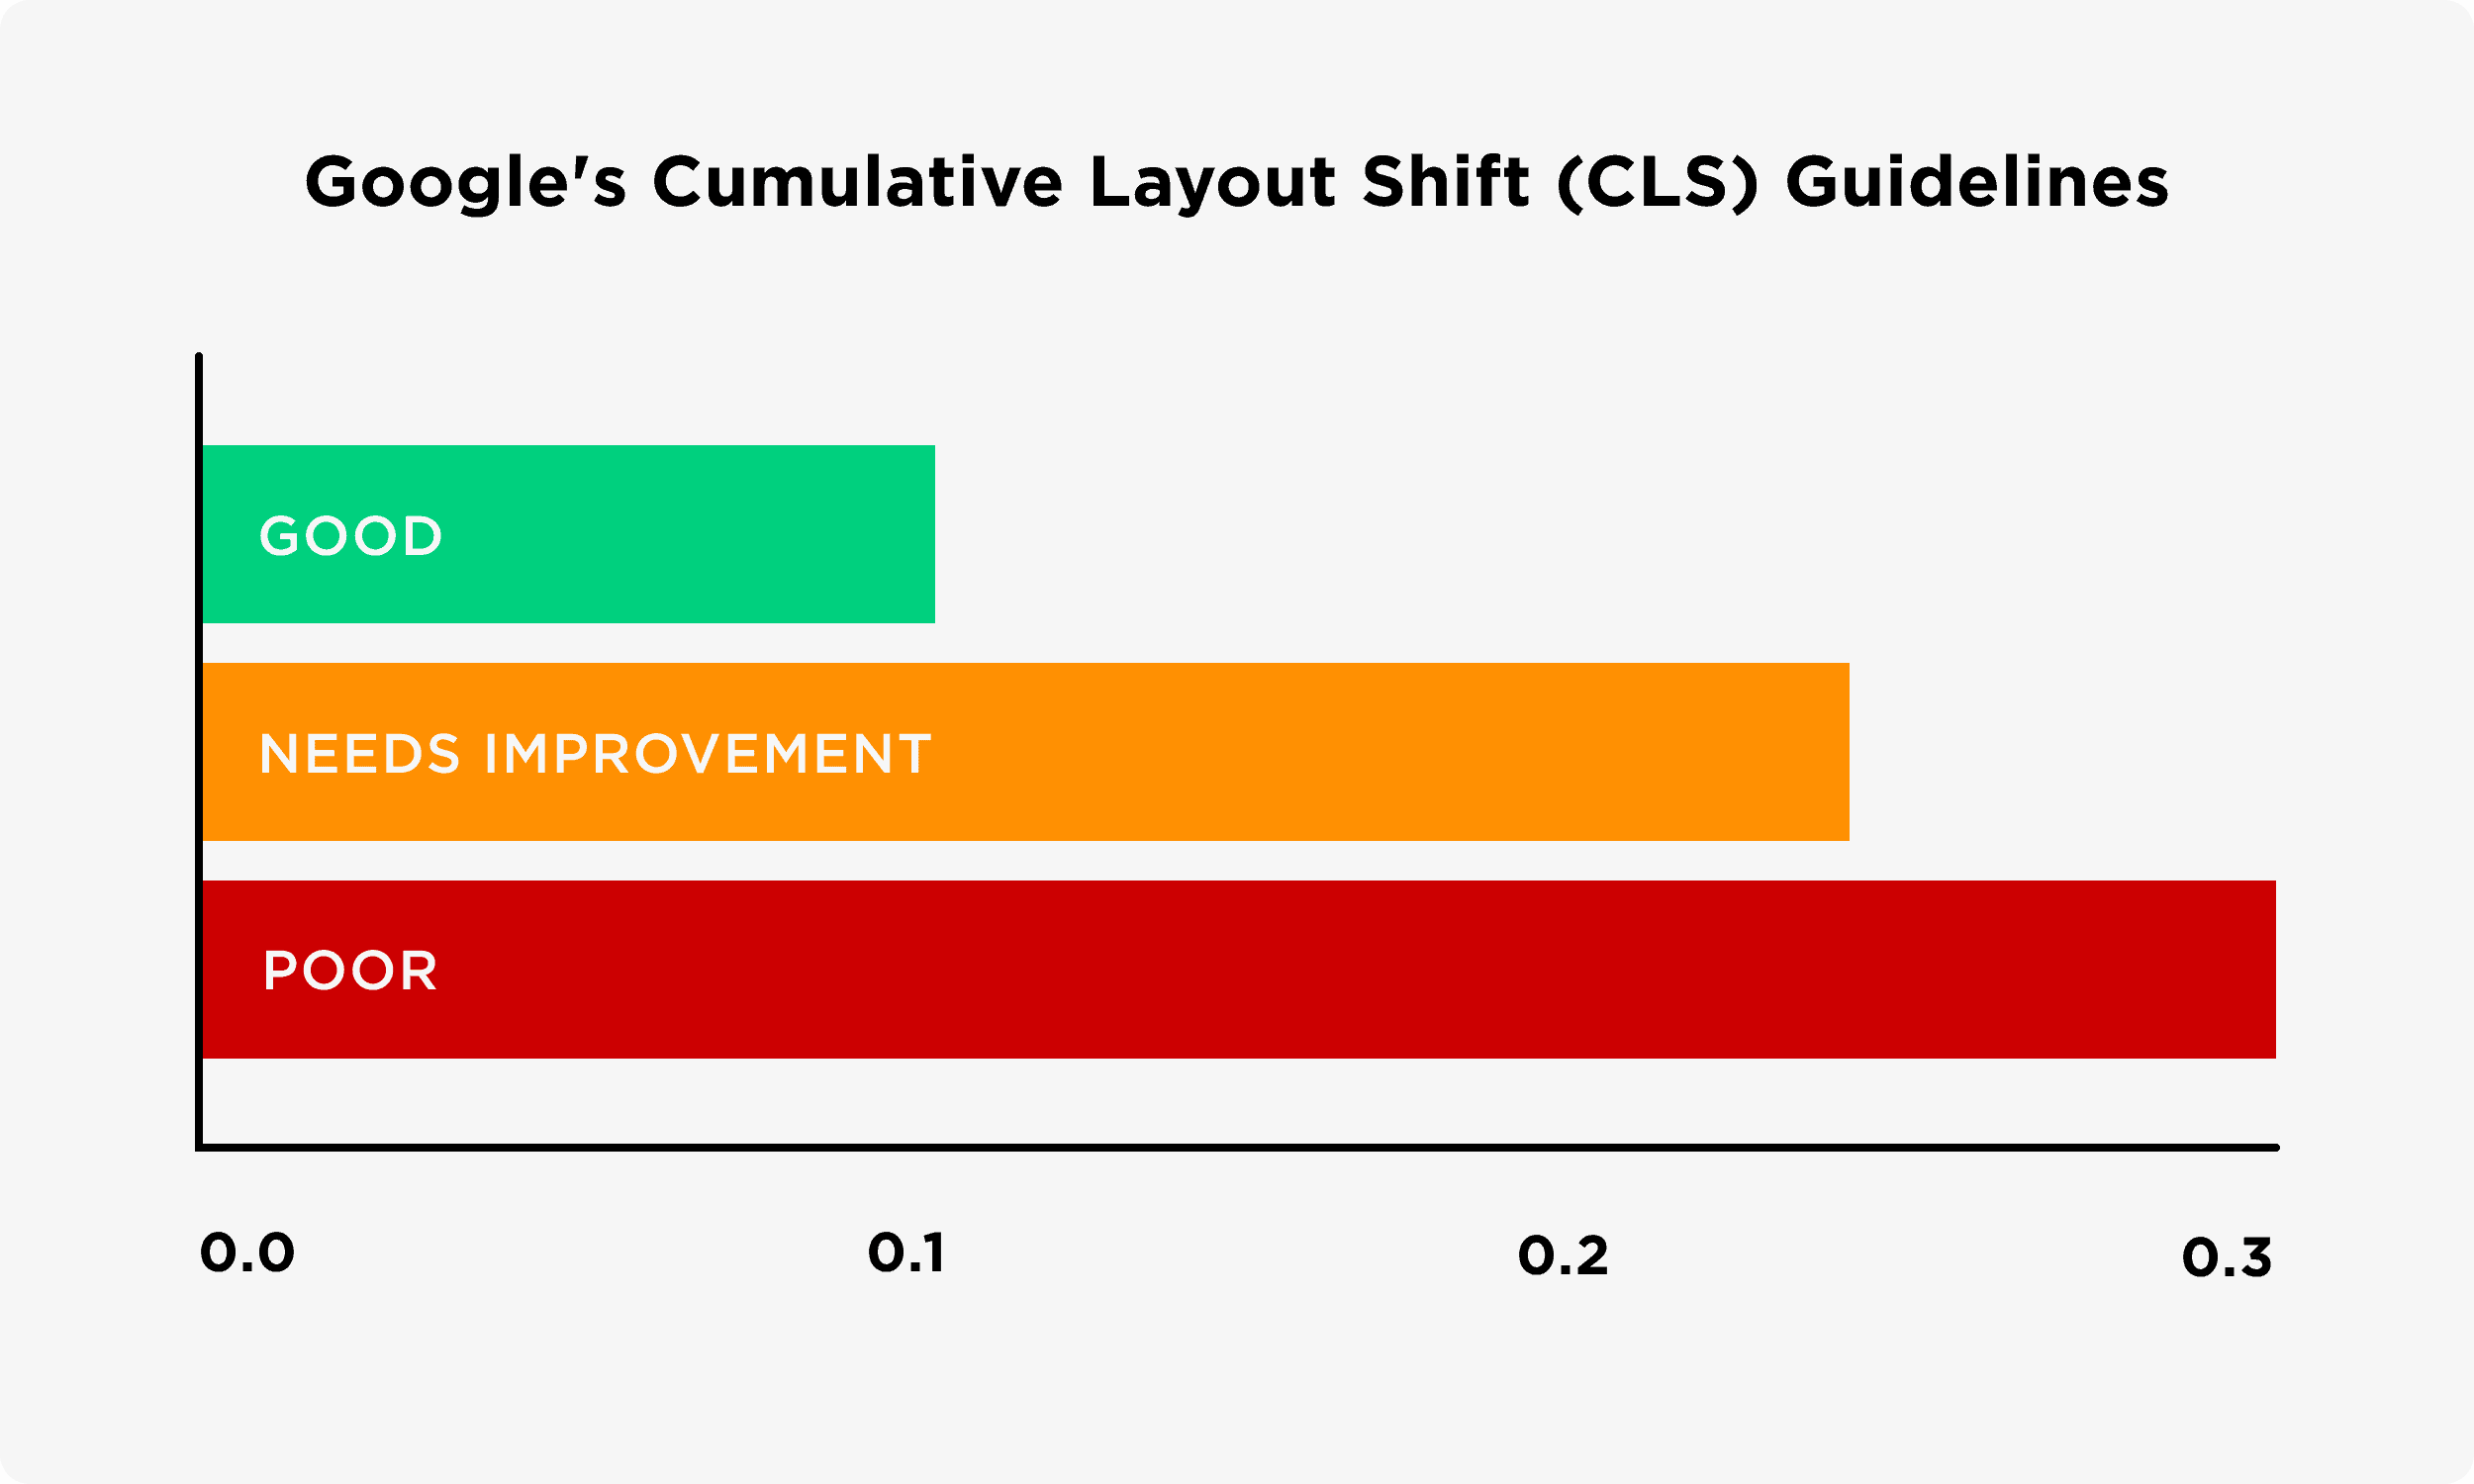 Google's cumulative layout shift guidelines